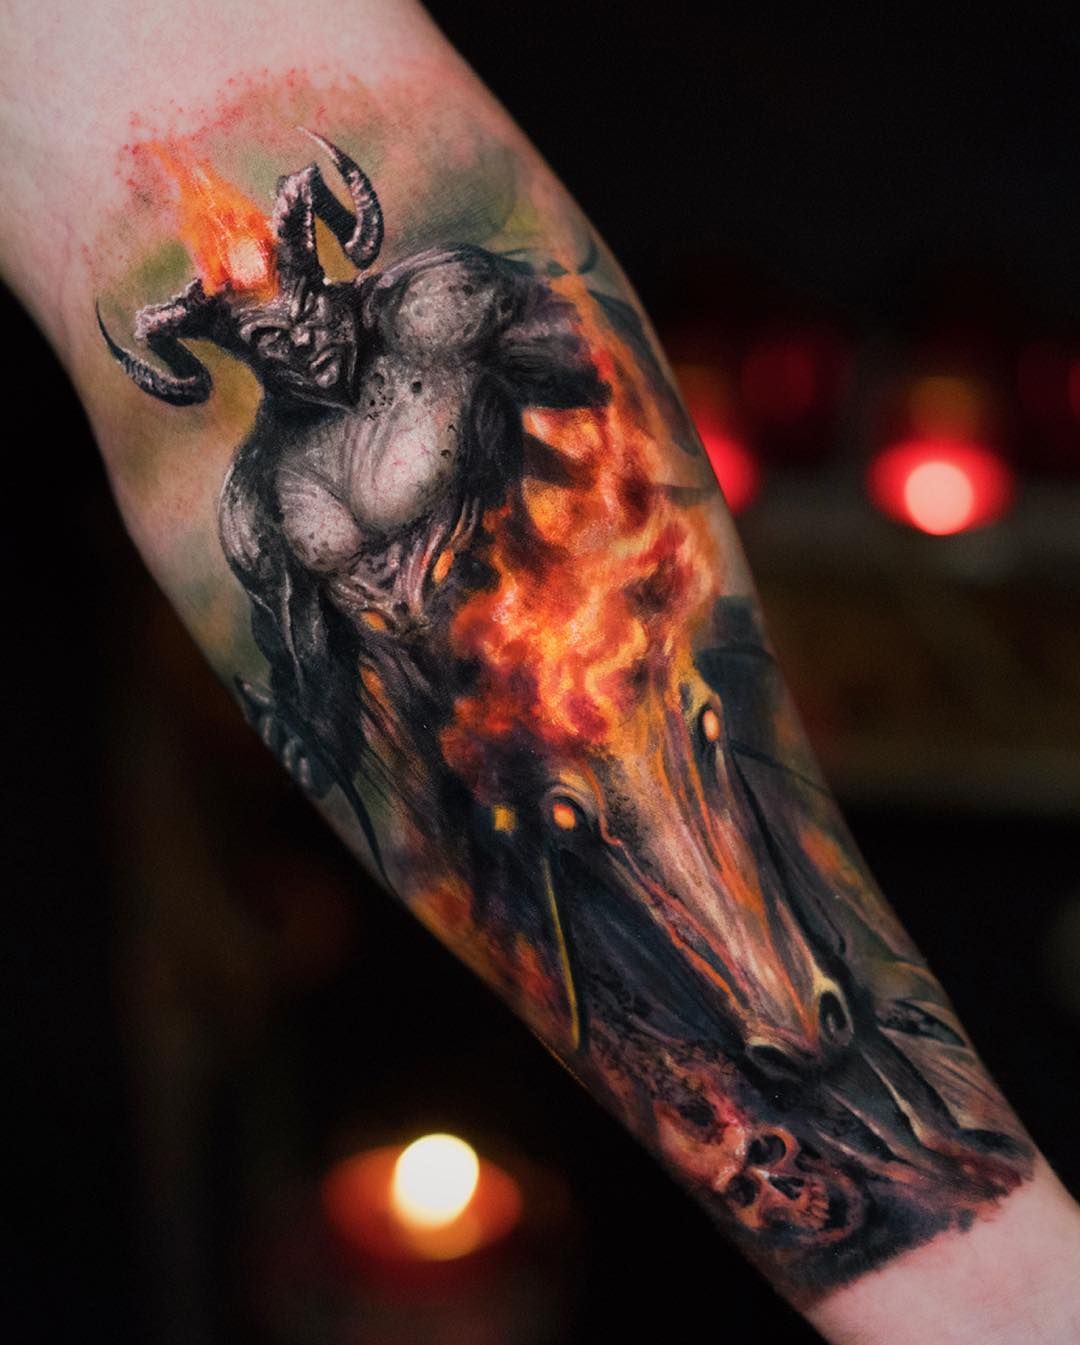 This hyper realistic tattoo with smoke and fire by JamesTattooArt   rnextfuckinglevel